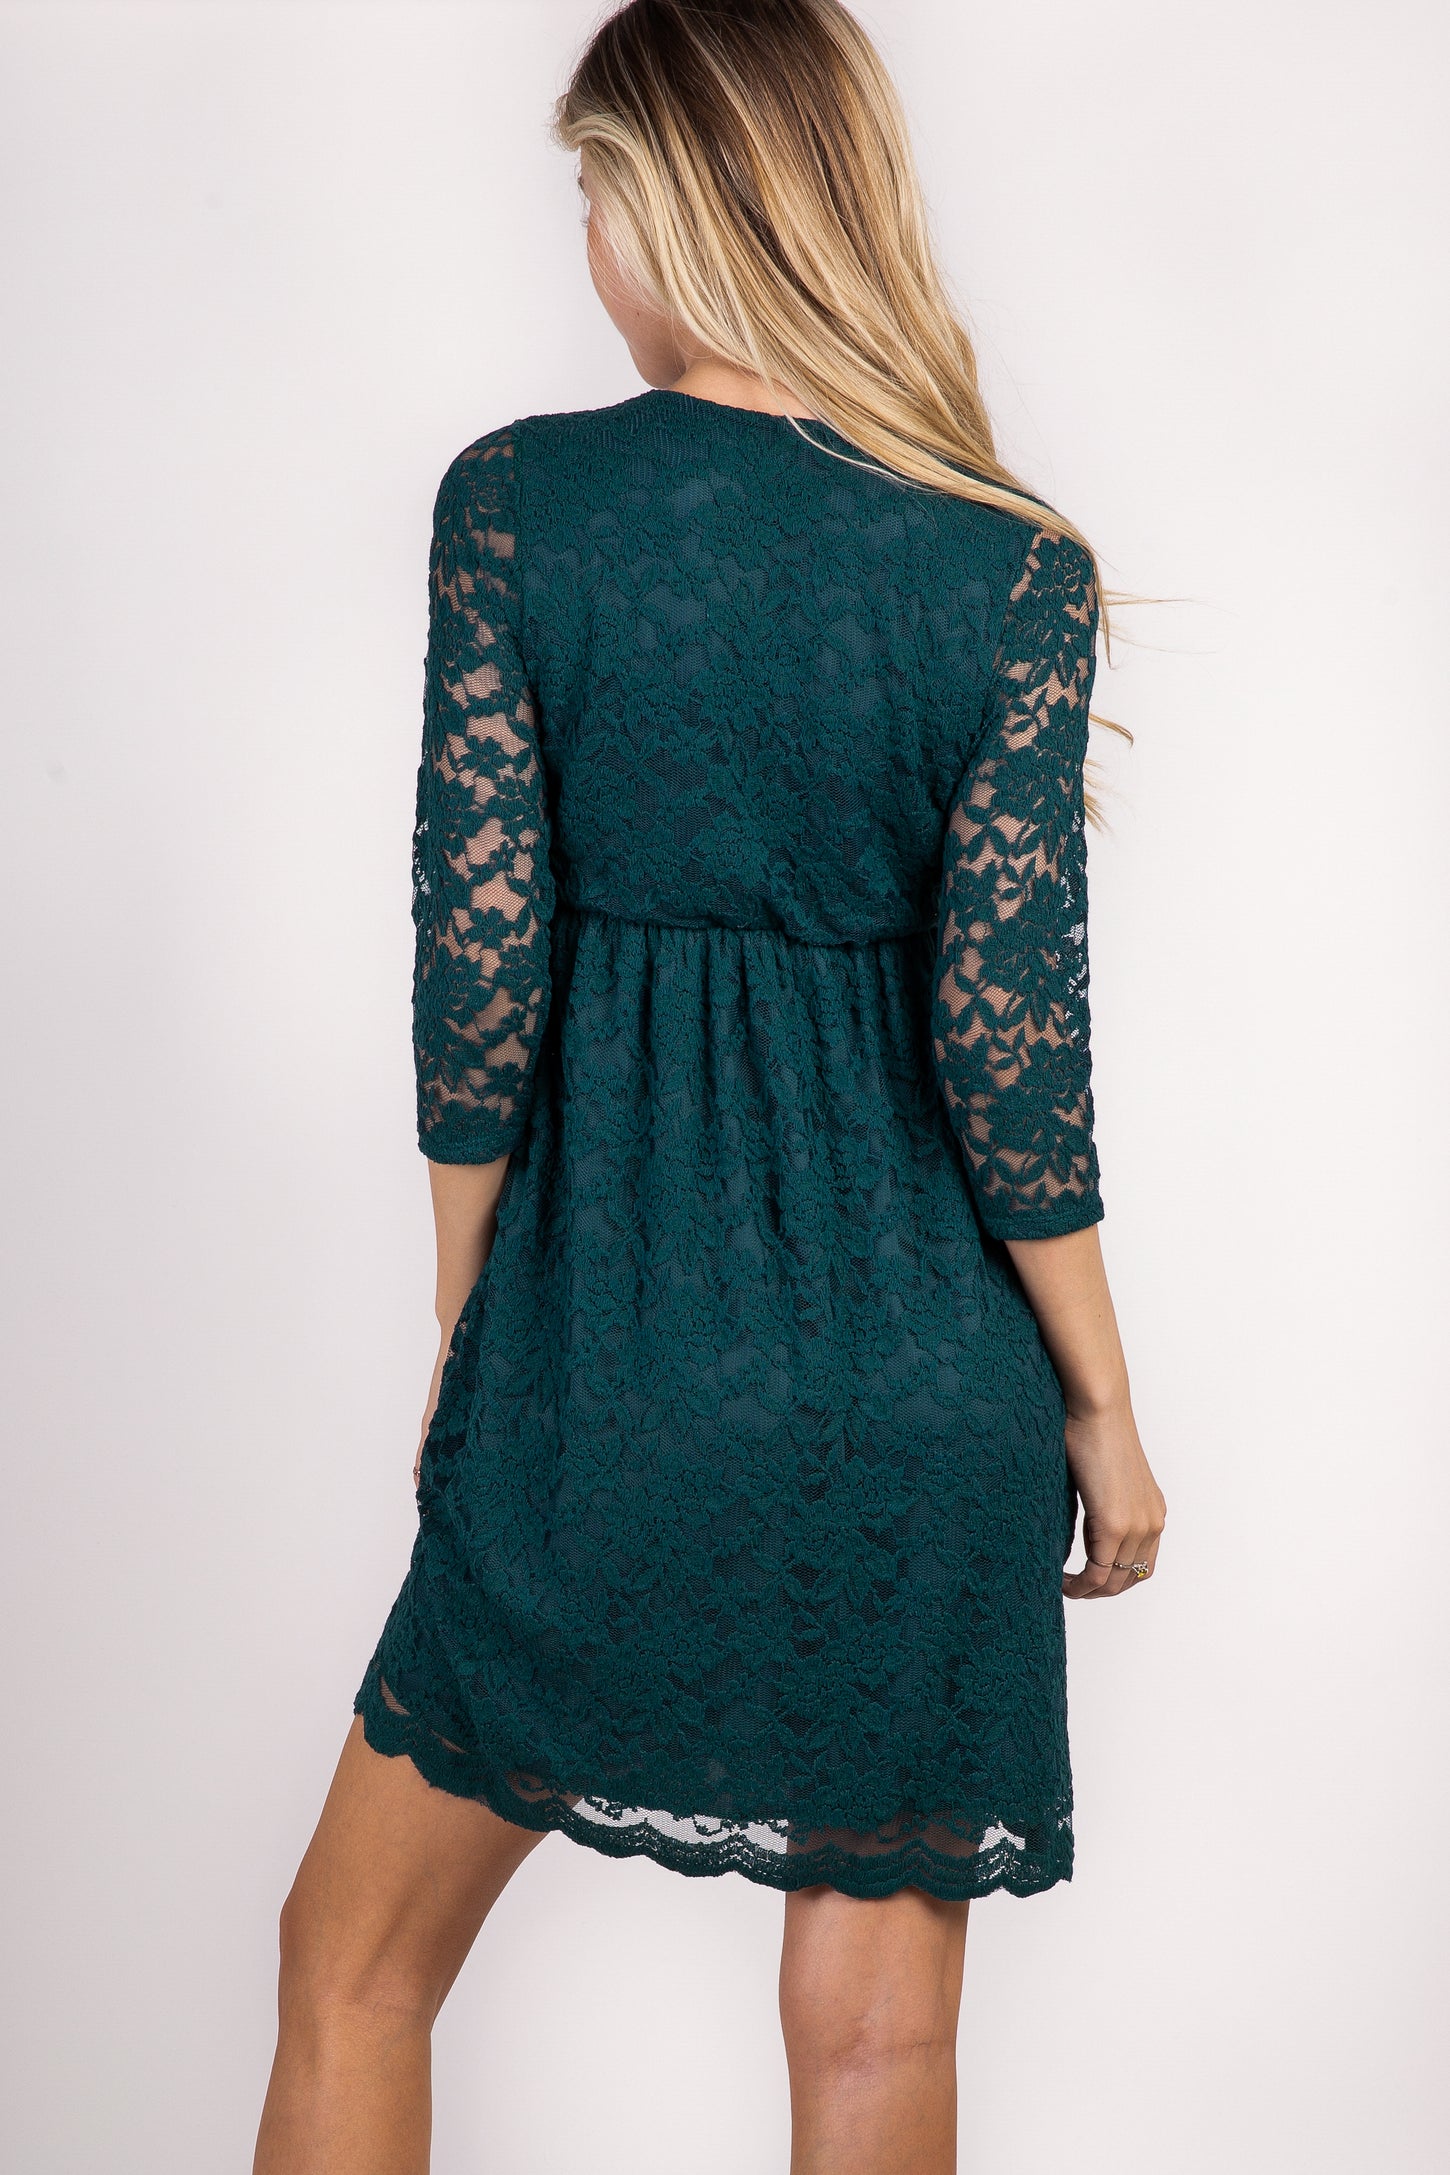 Wrap Overlay PinkBlush Green Dress– Lace Forest